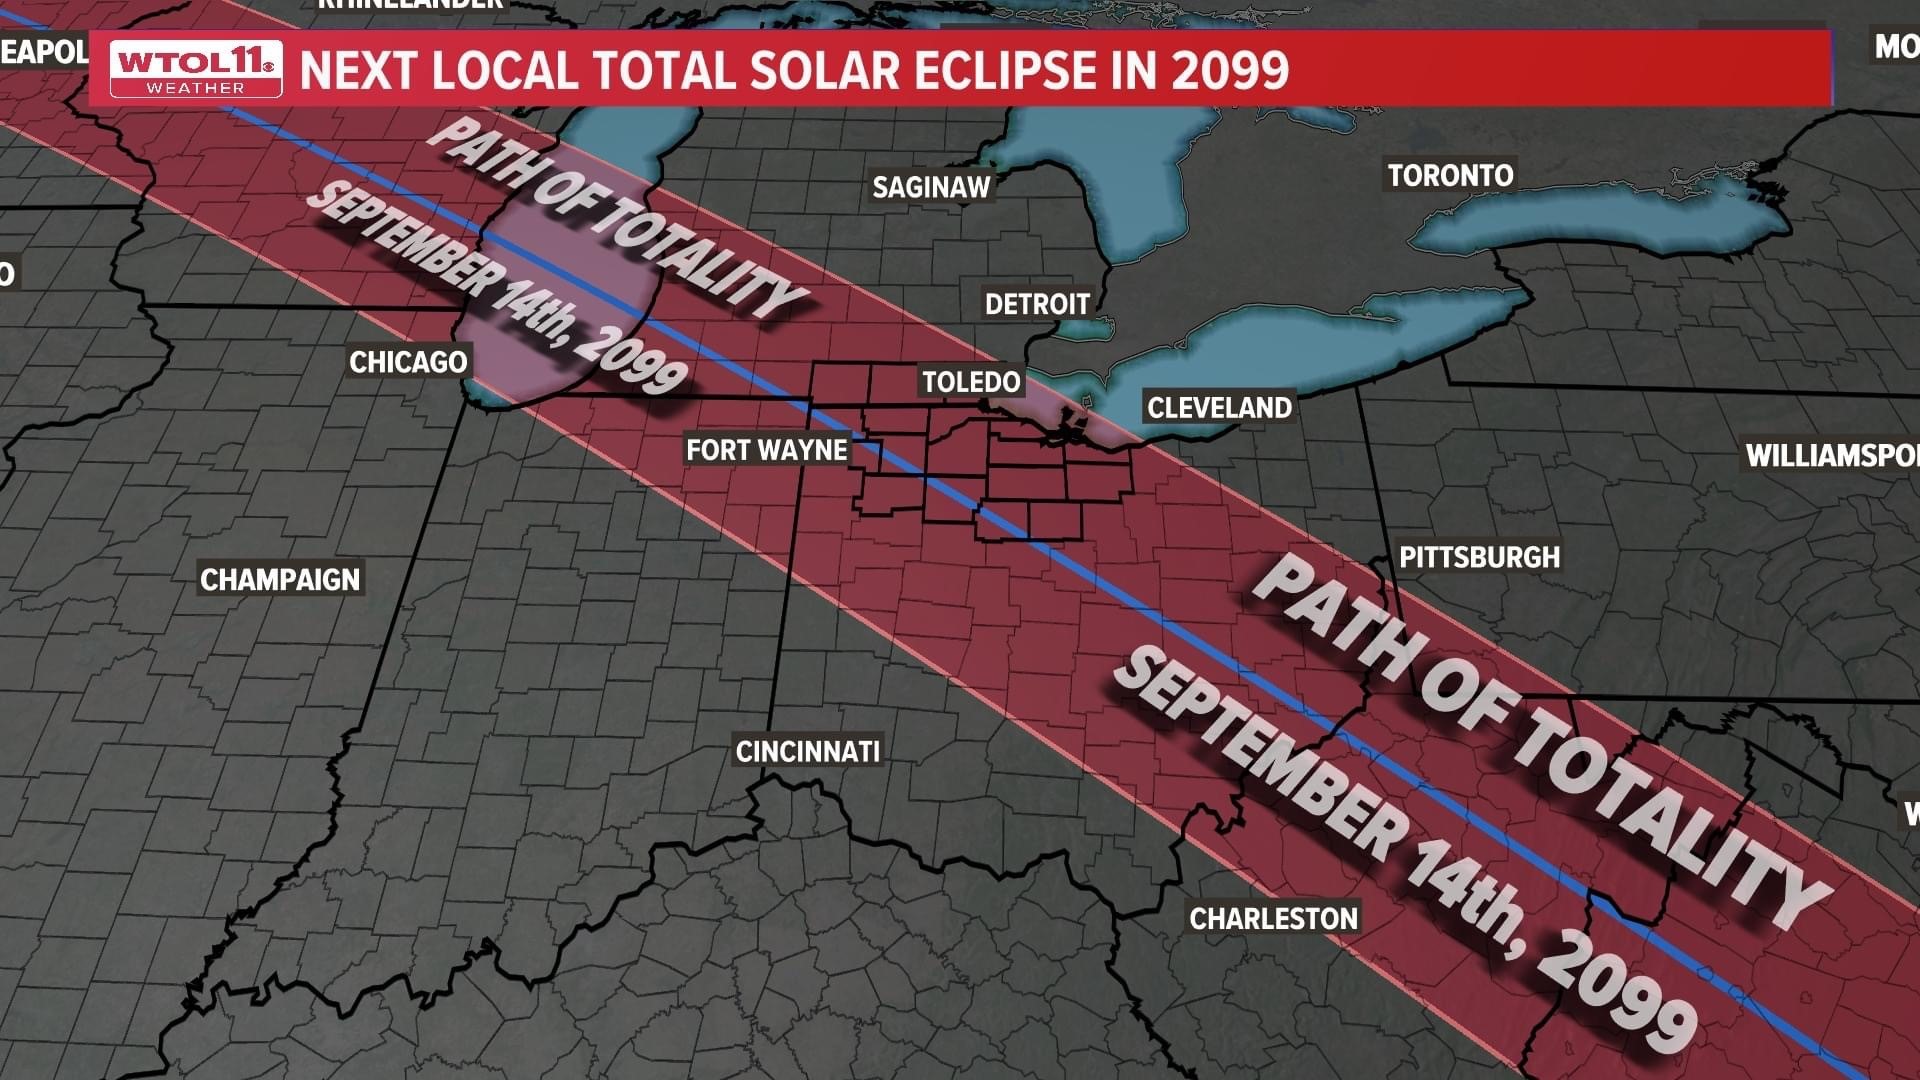 WTOL 11 meteorologist Kaylee Bowers explains when the next total solar eclipse will occur.